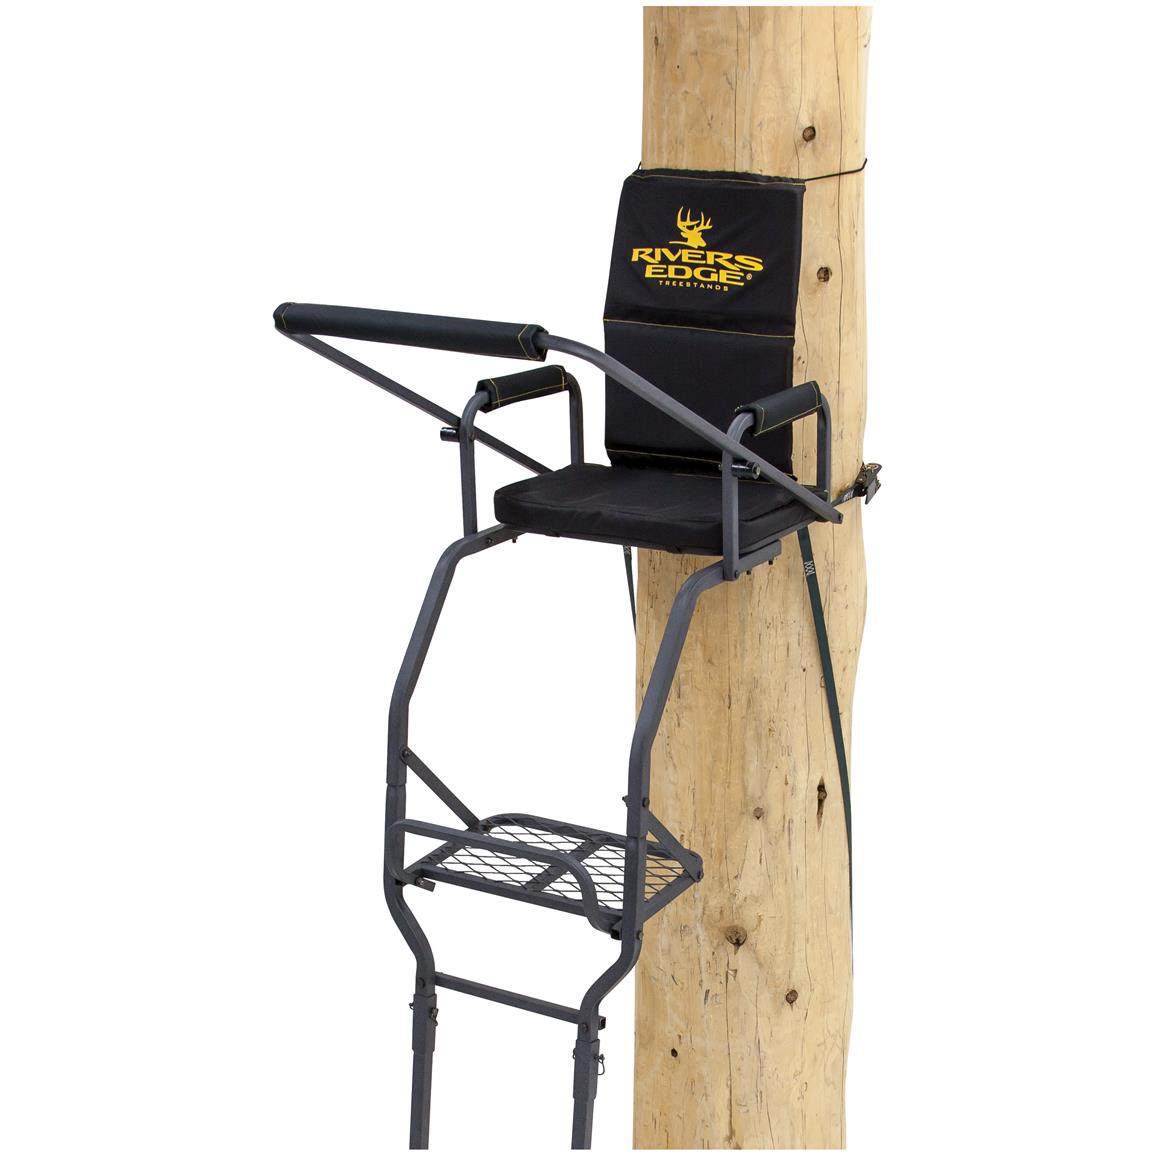 Rivers Edge Deluxe 1 Man 16 Ladder Tree Stand 667268 Ladder Tree Stands At Sportsman S Guide